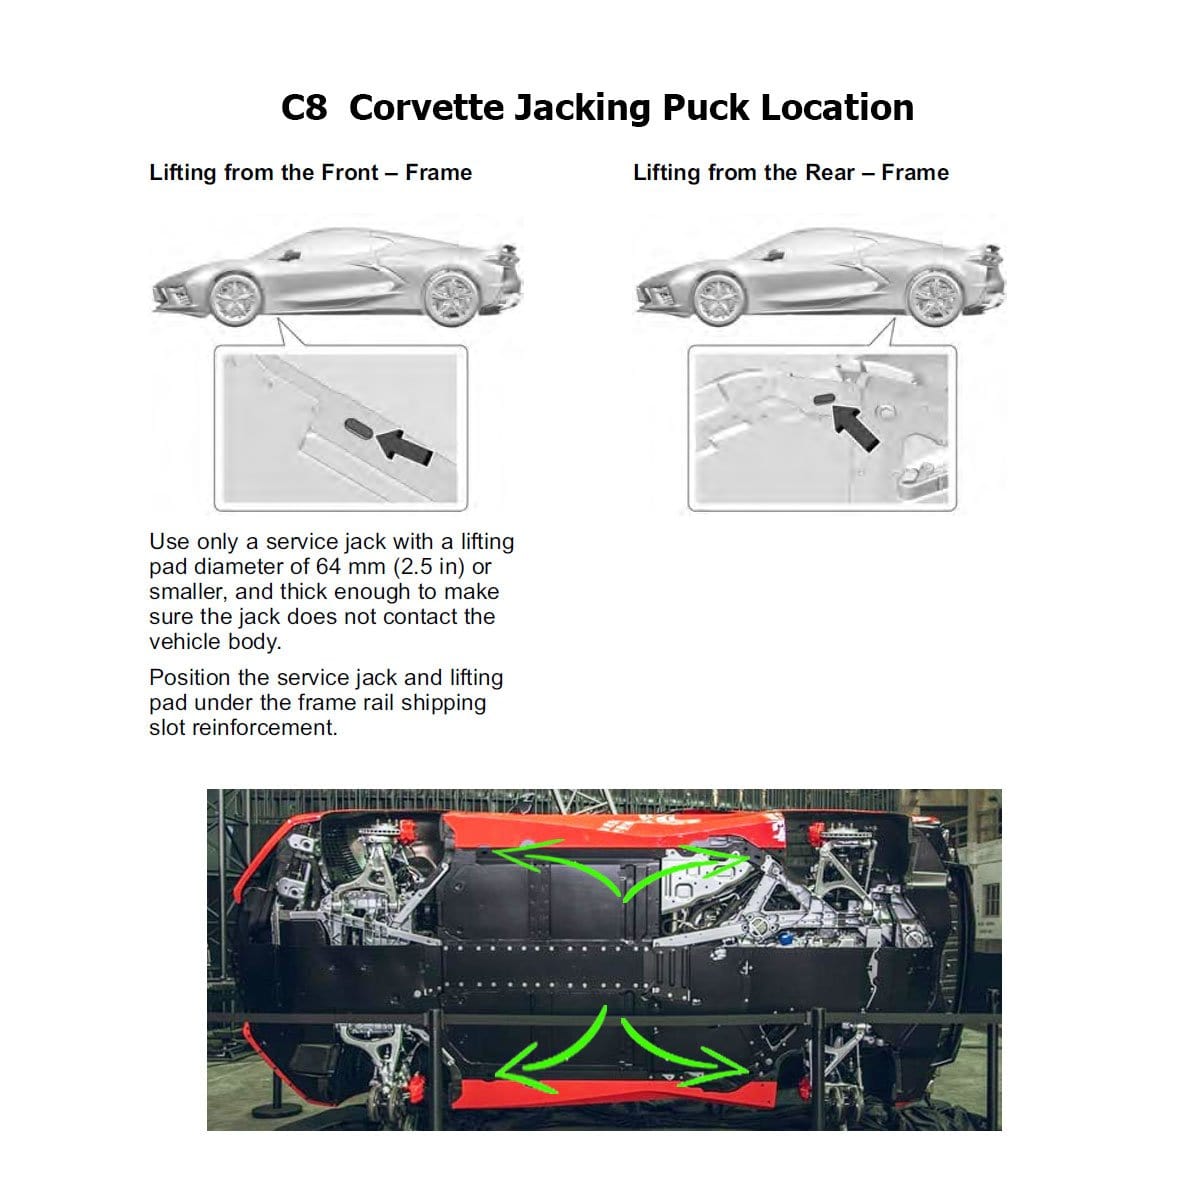 ACS Composite Corvette Jacking Pucks for C5-C8 models, made of heavy-duty aluminum with red, black, or blue metallic finish. SKU [45-4-195].